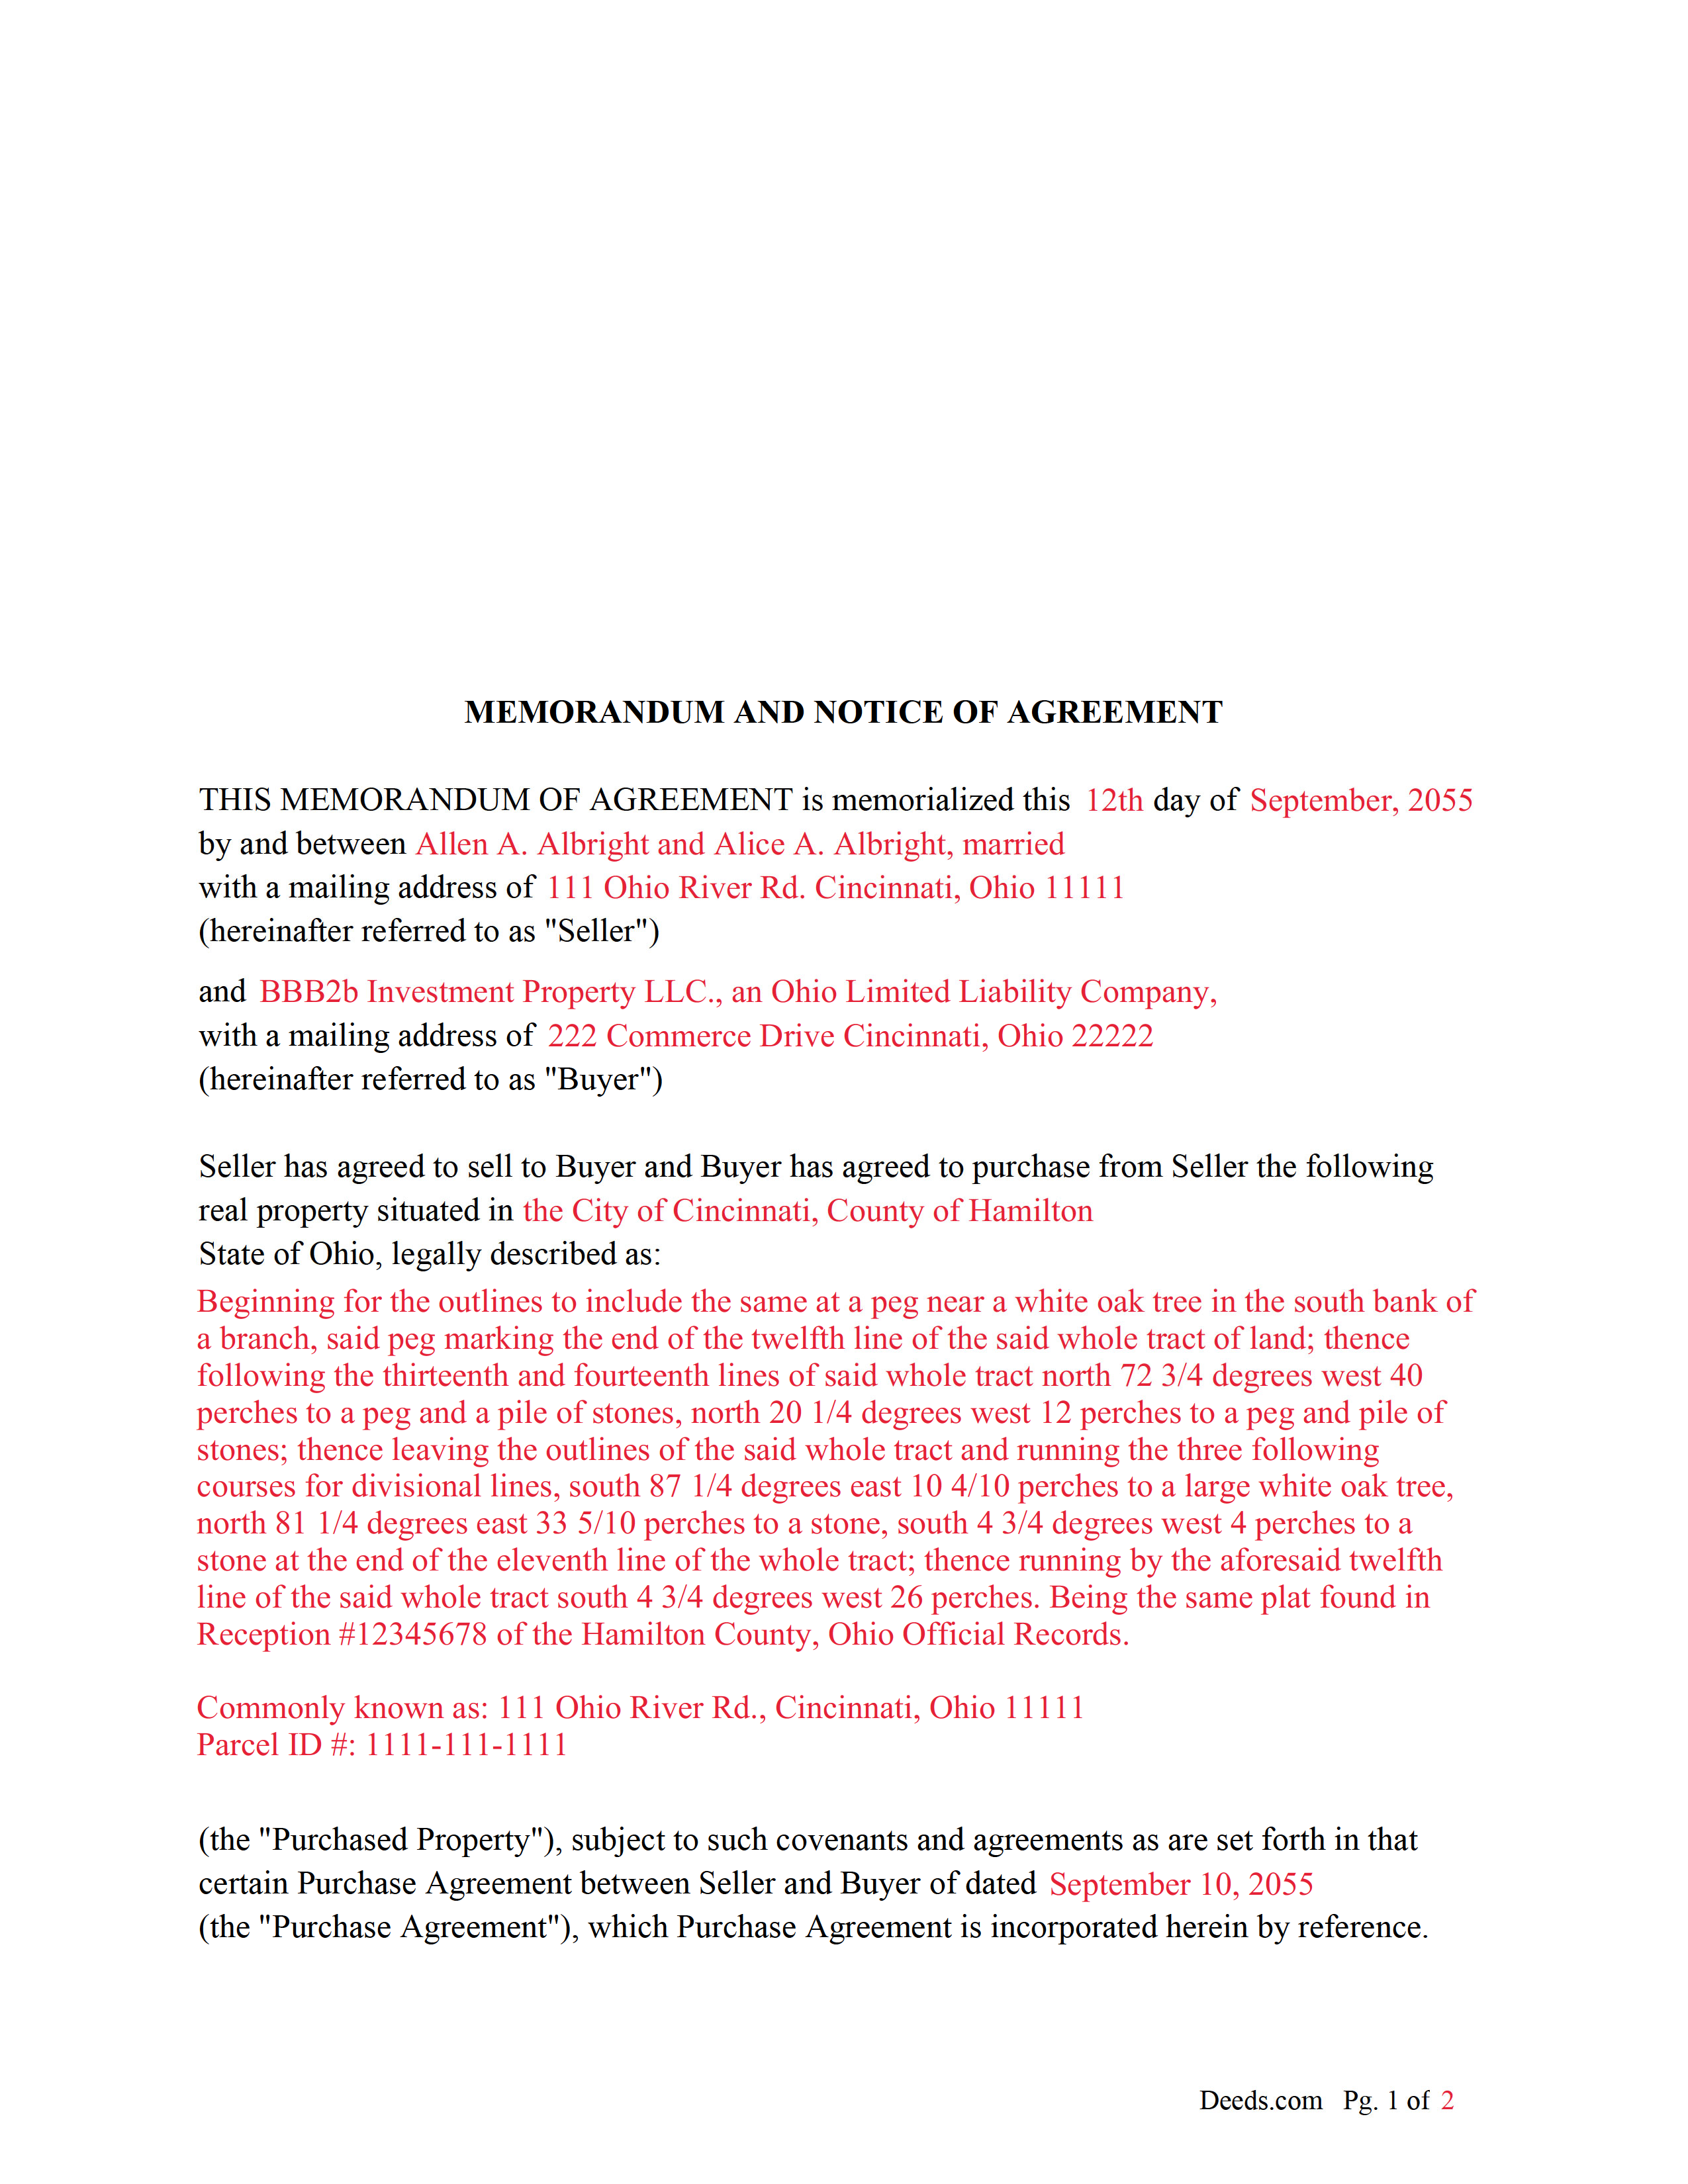 Completed Example of the Memorandum and Notice of Agreement Document